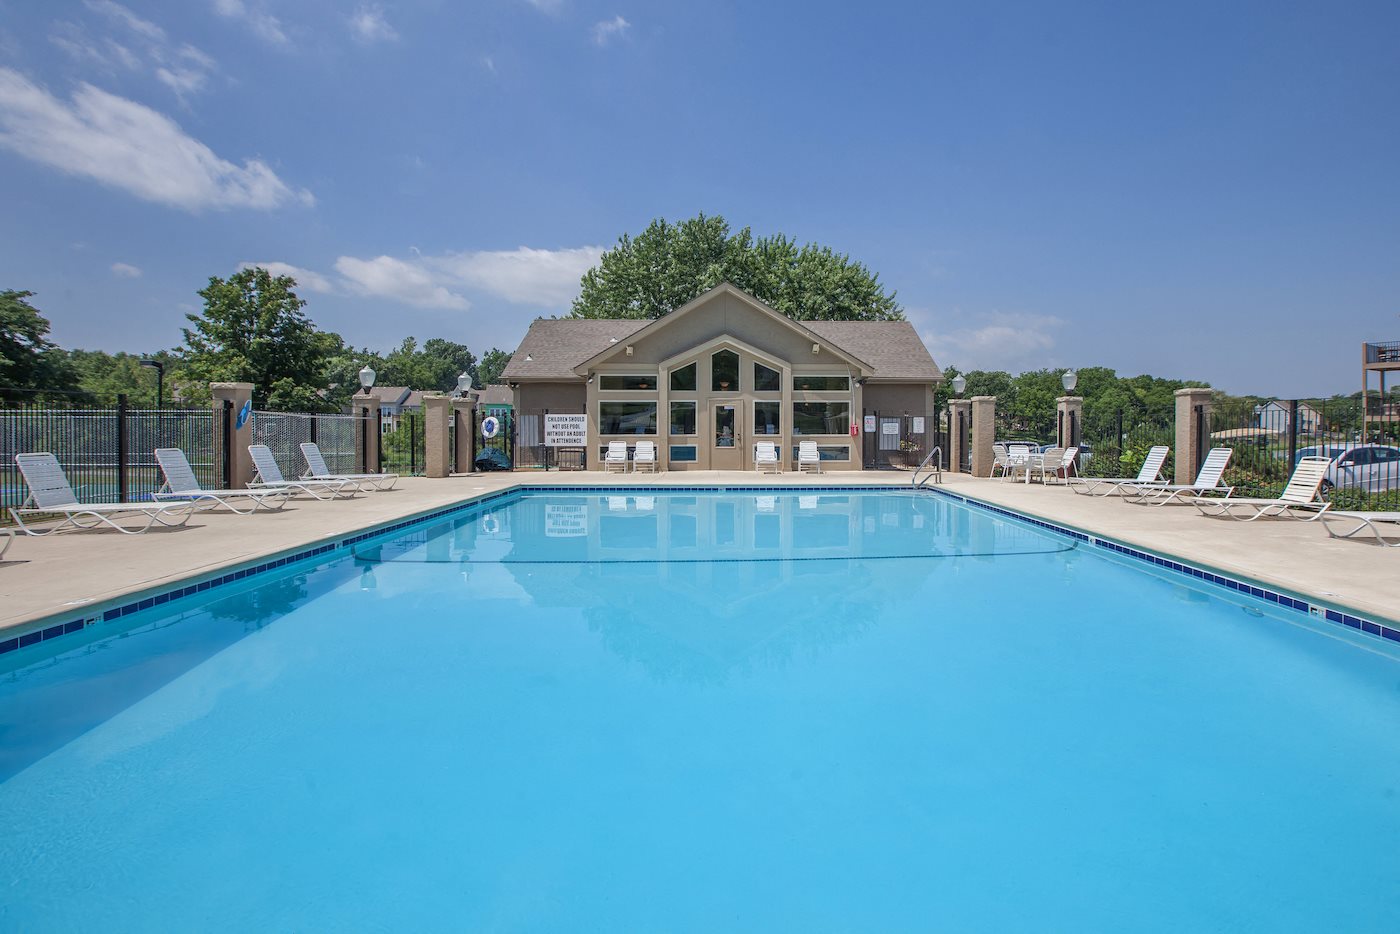 Community Clubhouse With Swimming Pool at Millcreek Woods Apartments, Kansas